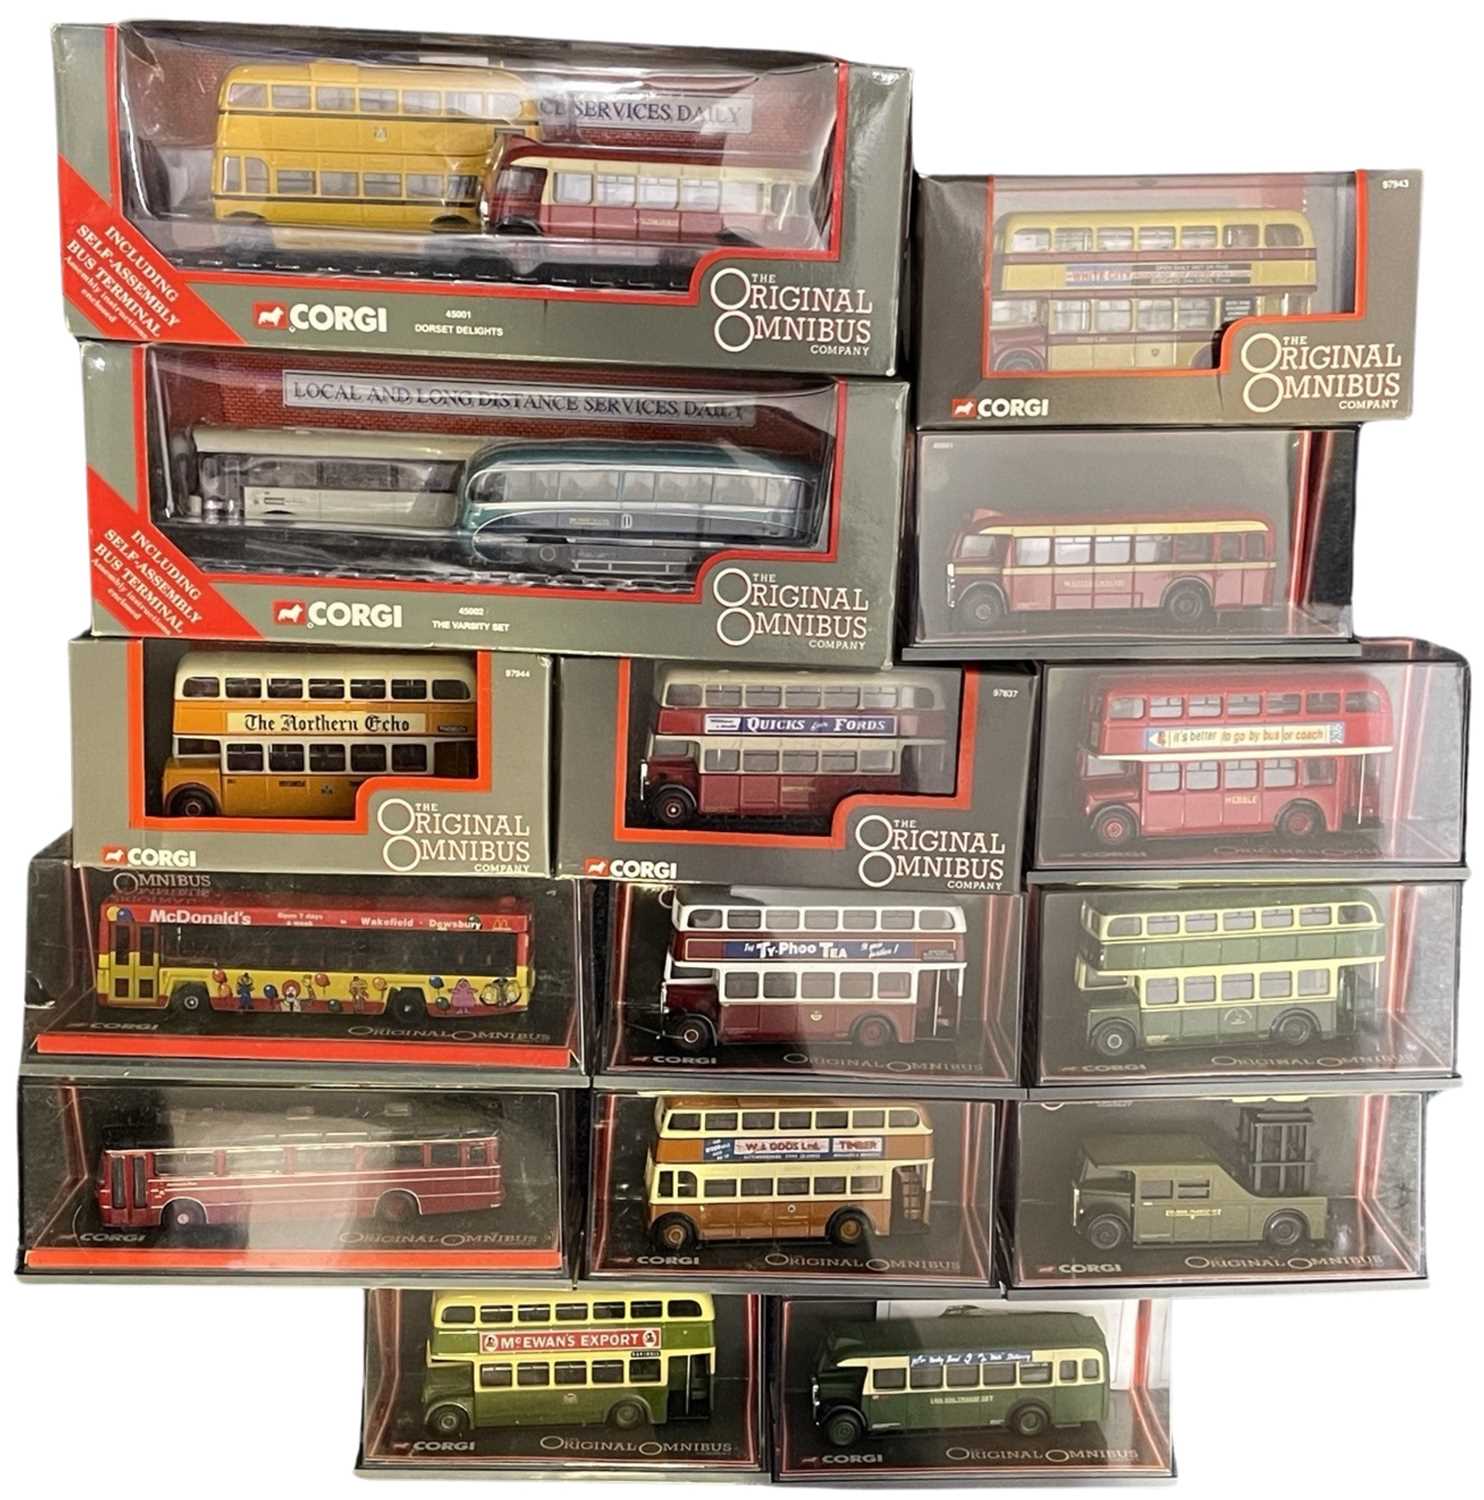 A collection of various cased Corgi Omnibus buses